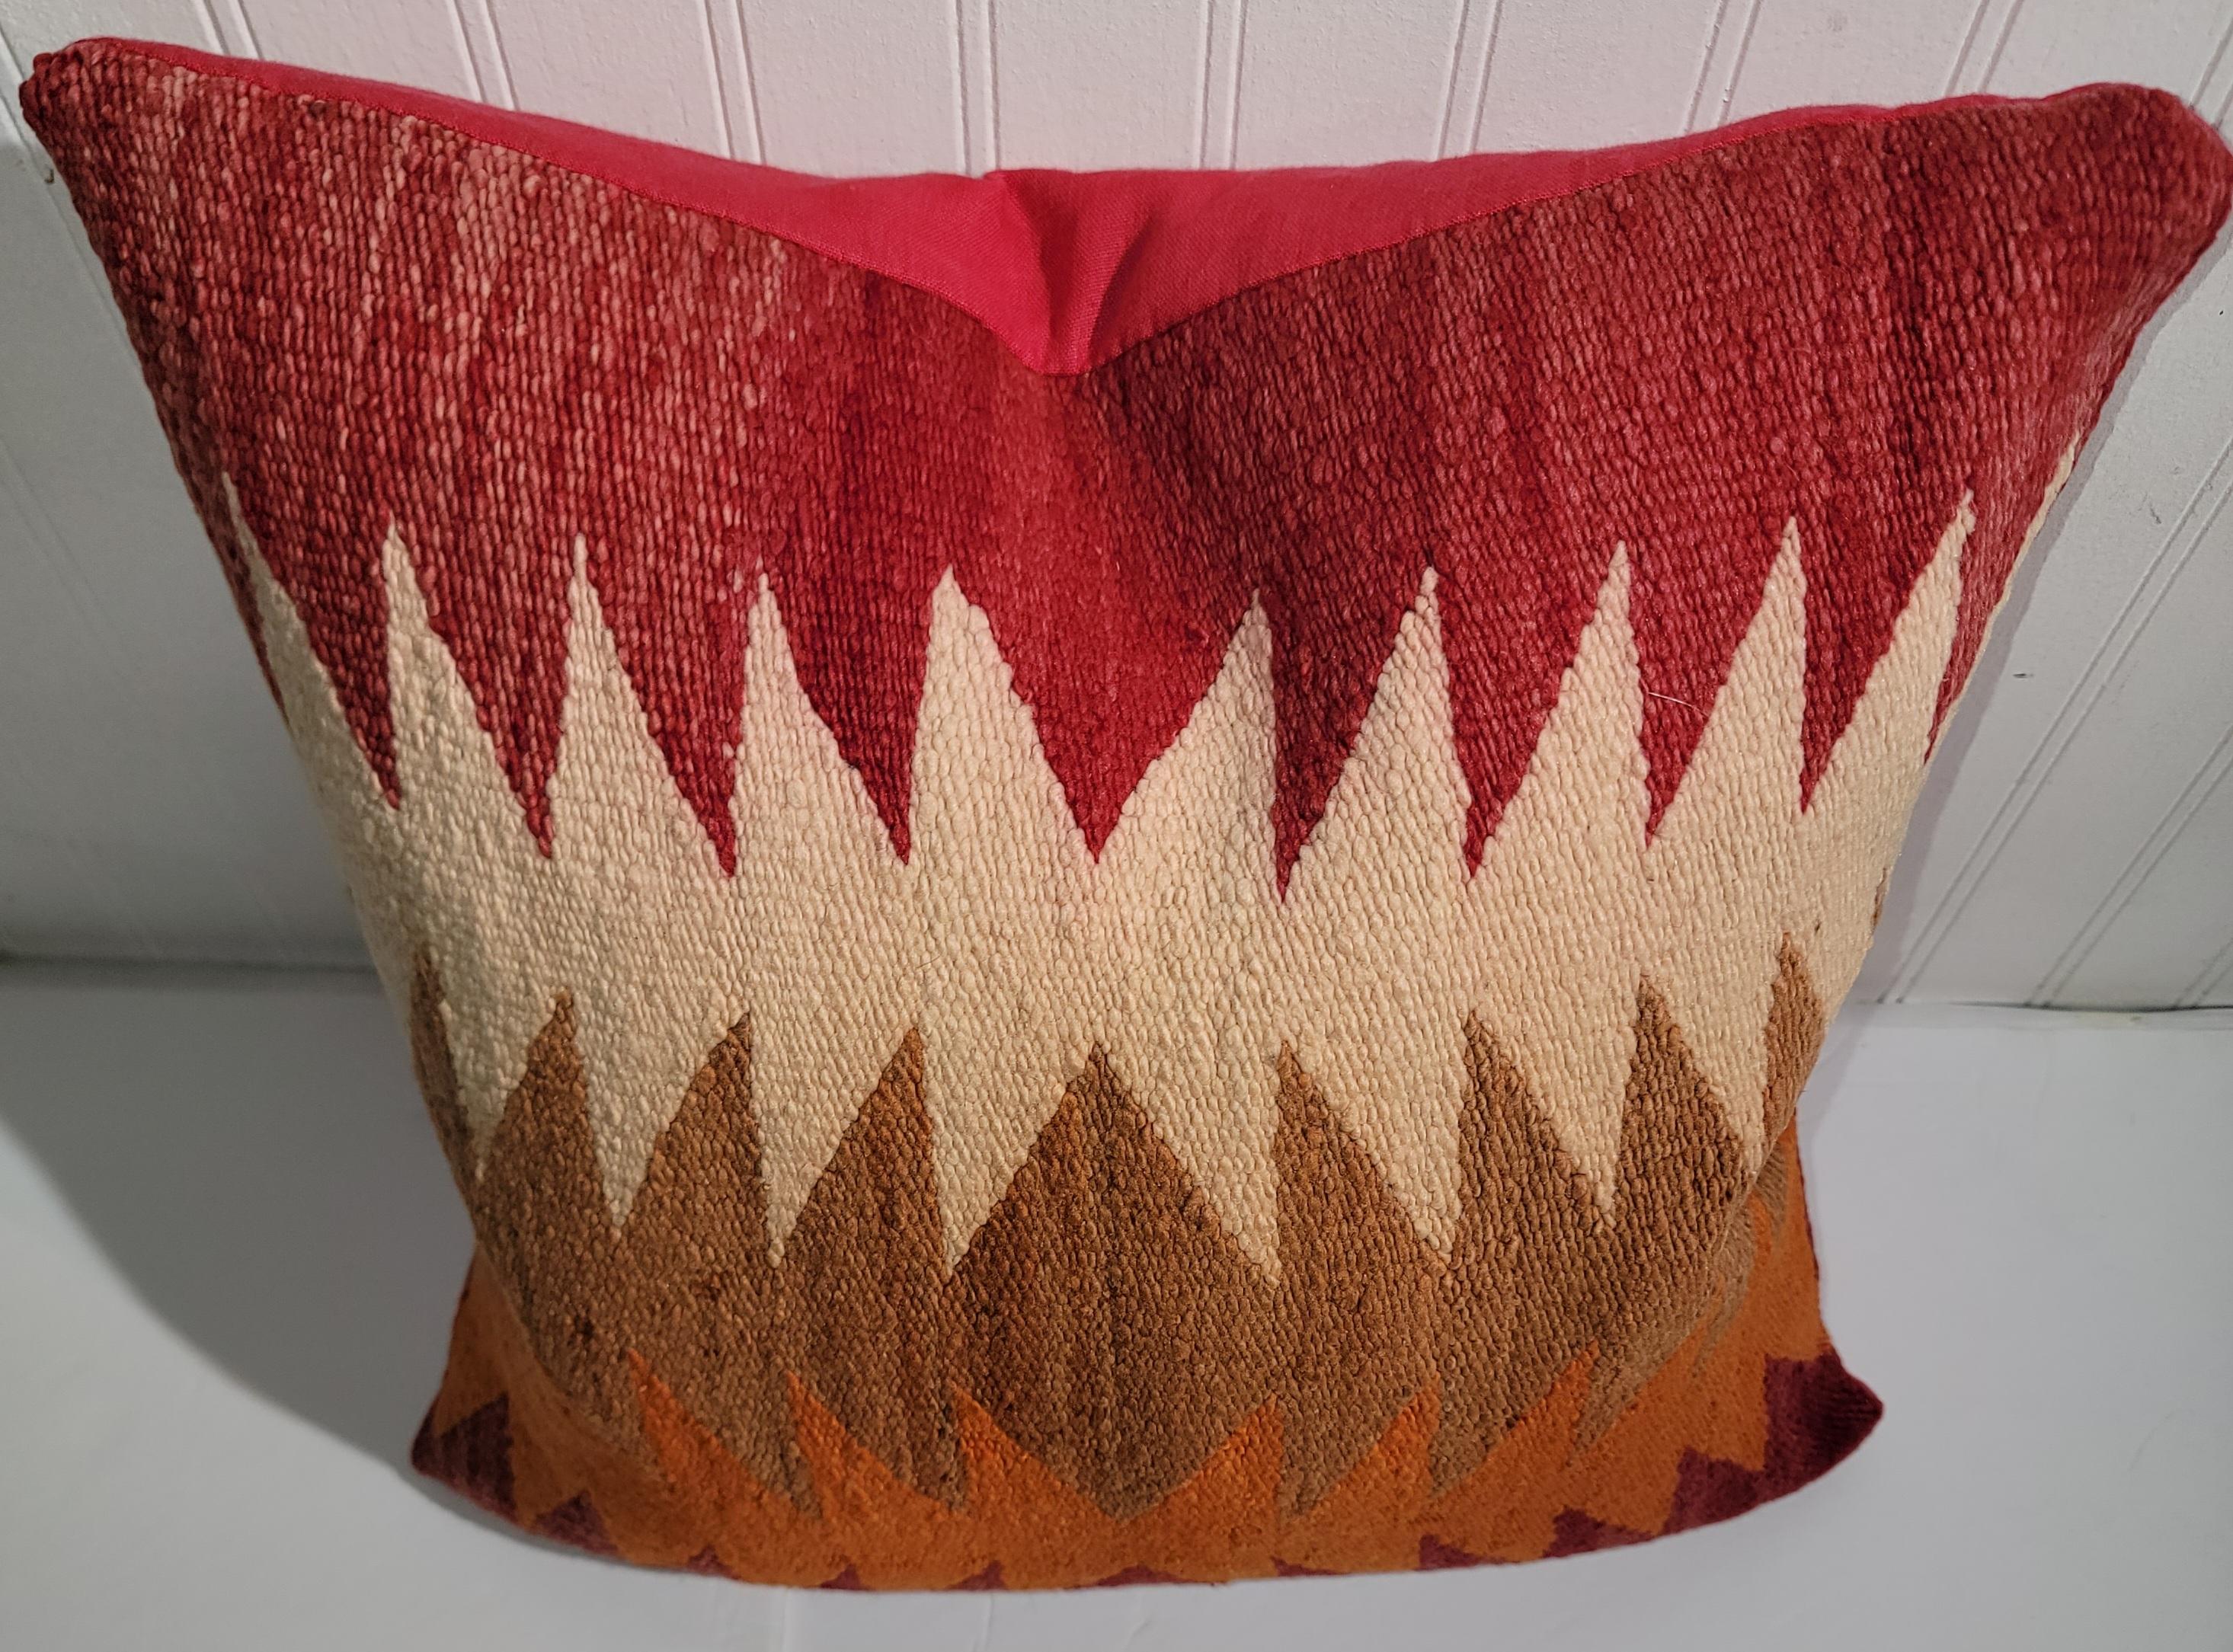 Wool Navajo Flame Stitch Pattern pillow with red linen backing. Great color in a flame pattern. Beautiful oranges and reds, whites and browns. Wonderful design. 